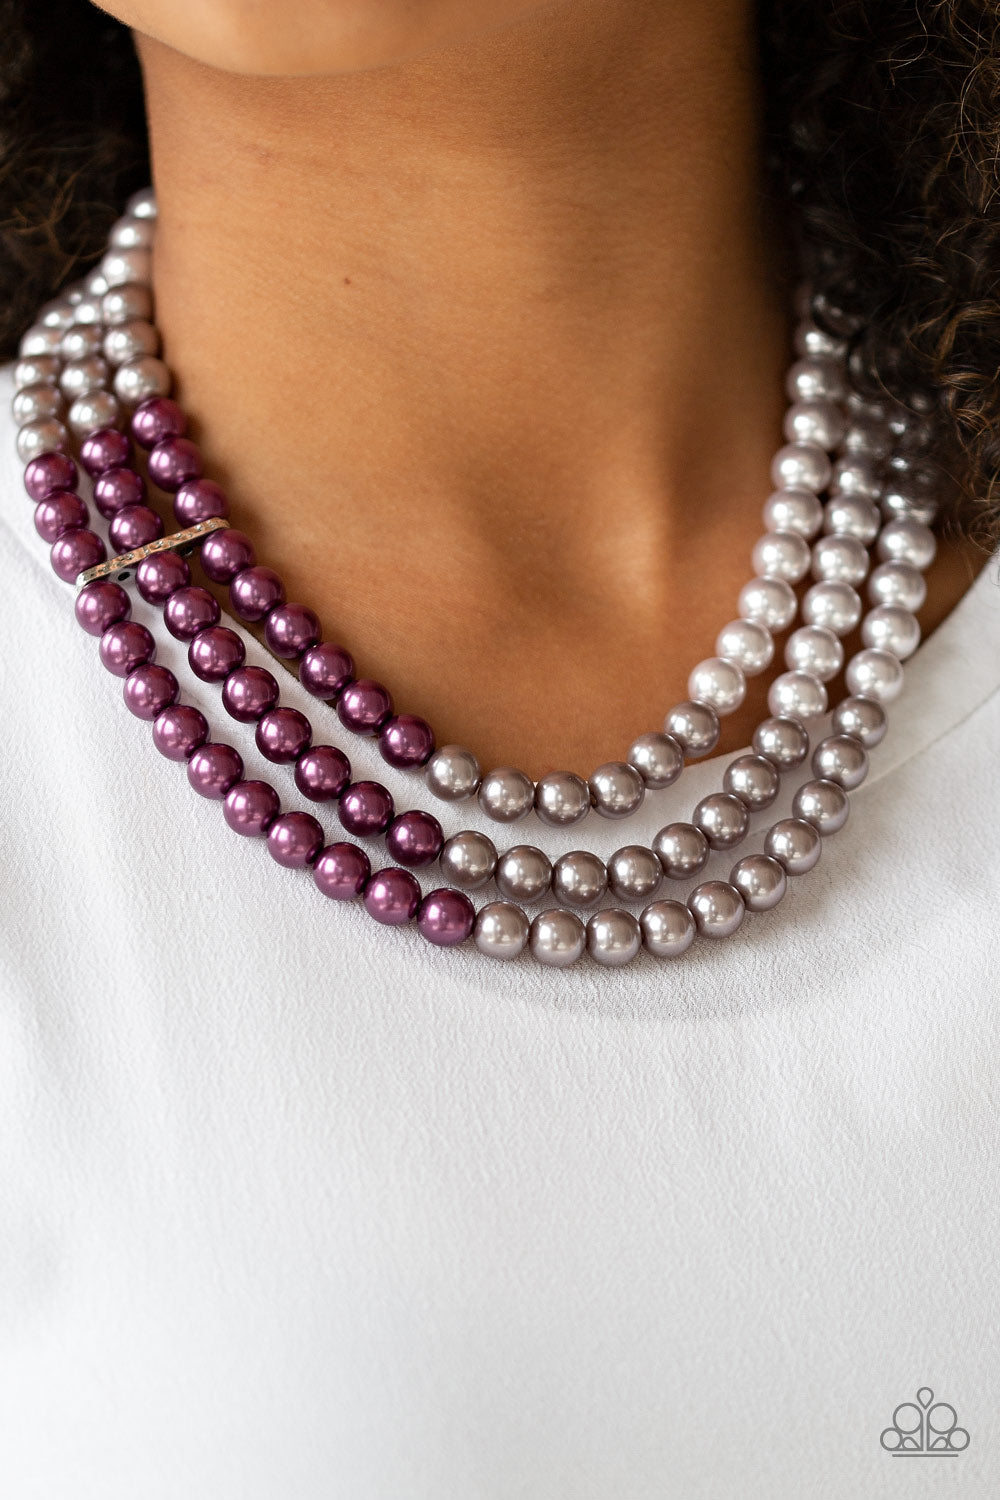 Paparazzi Necklace ~ Times Square Starlet - Purple Pearl Necklace